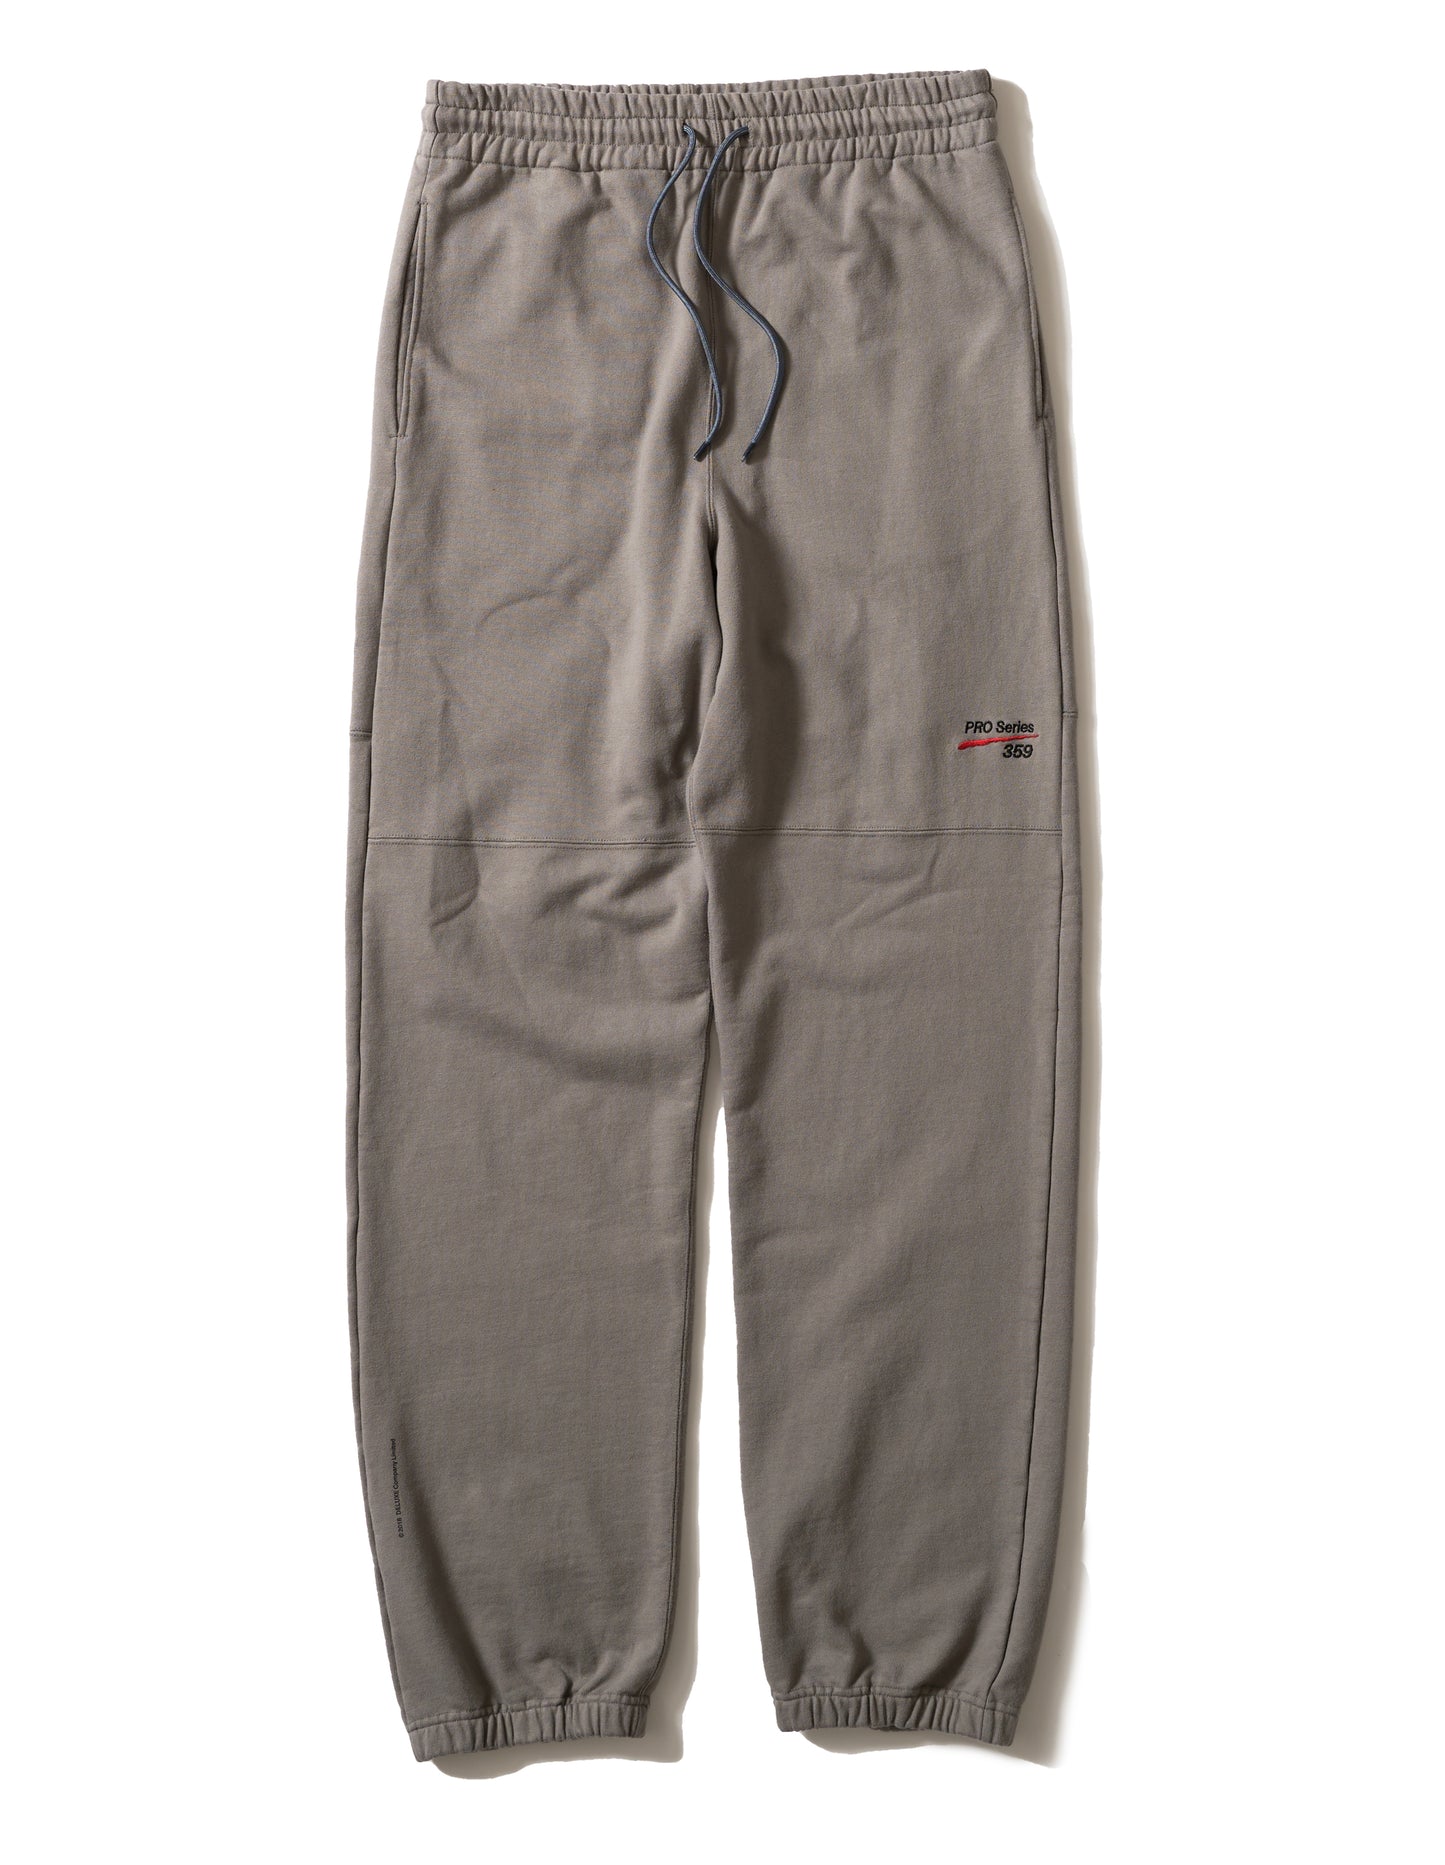 IN-N-OUT PANTS GRAY